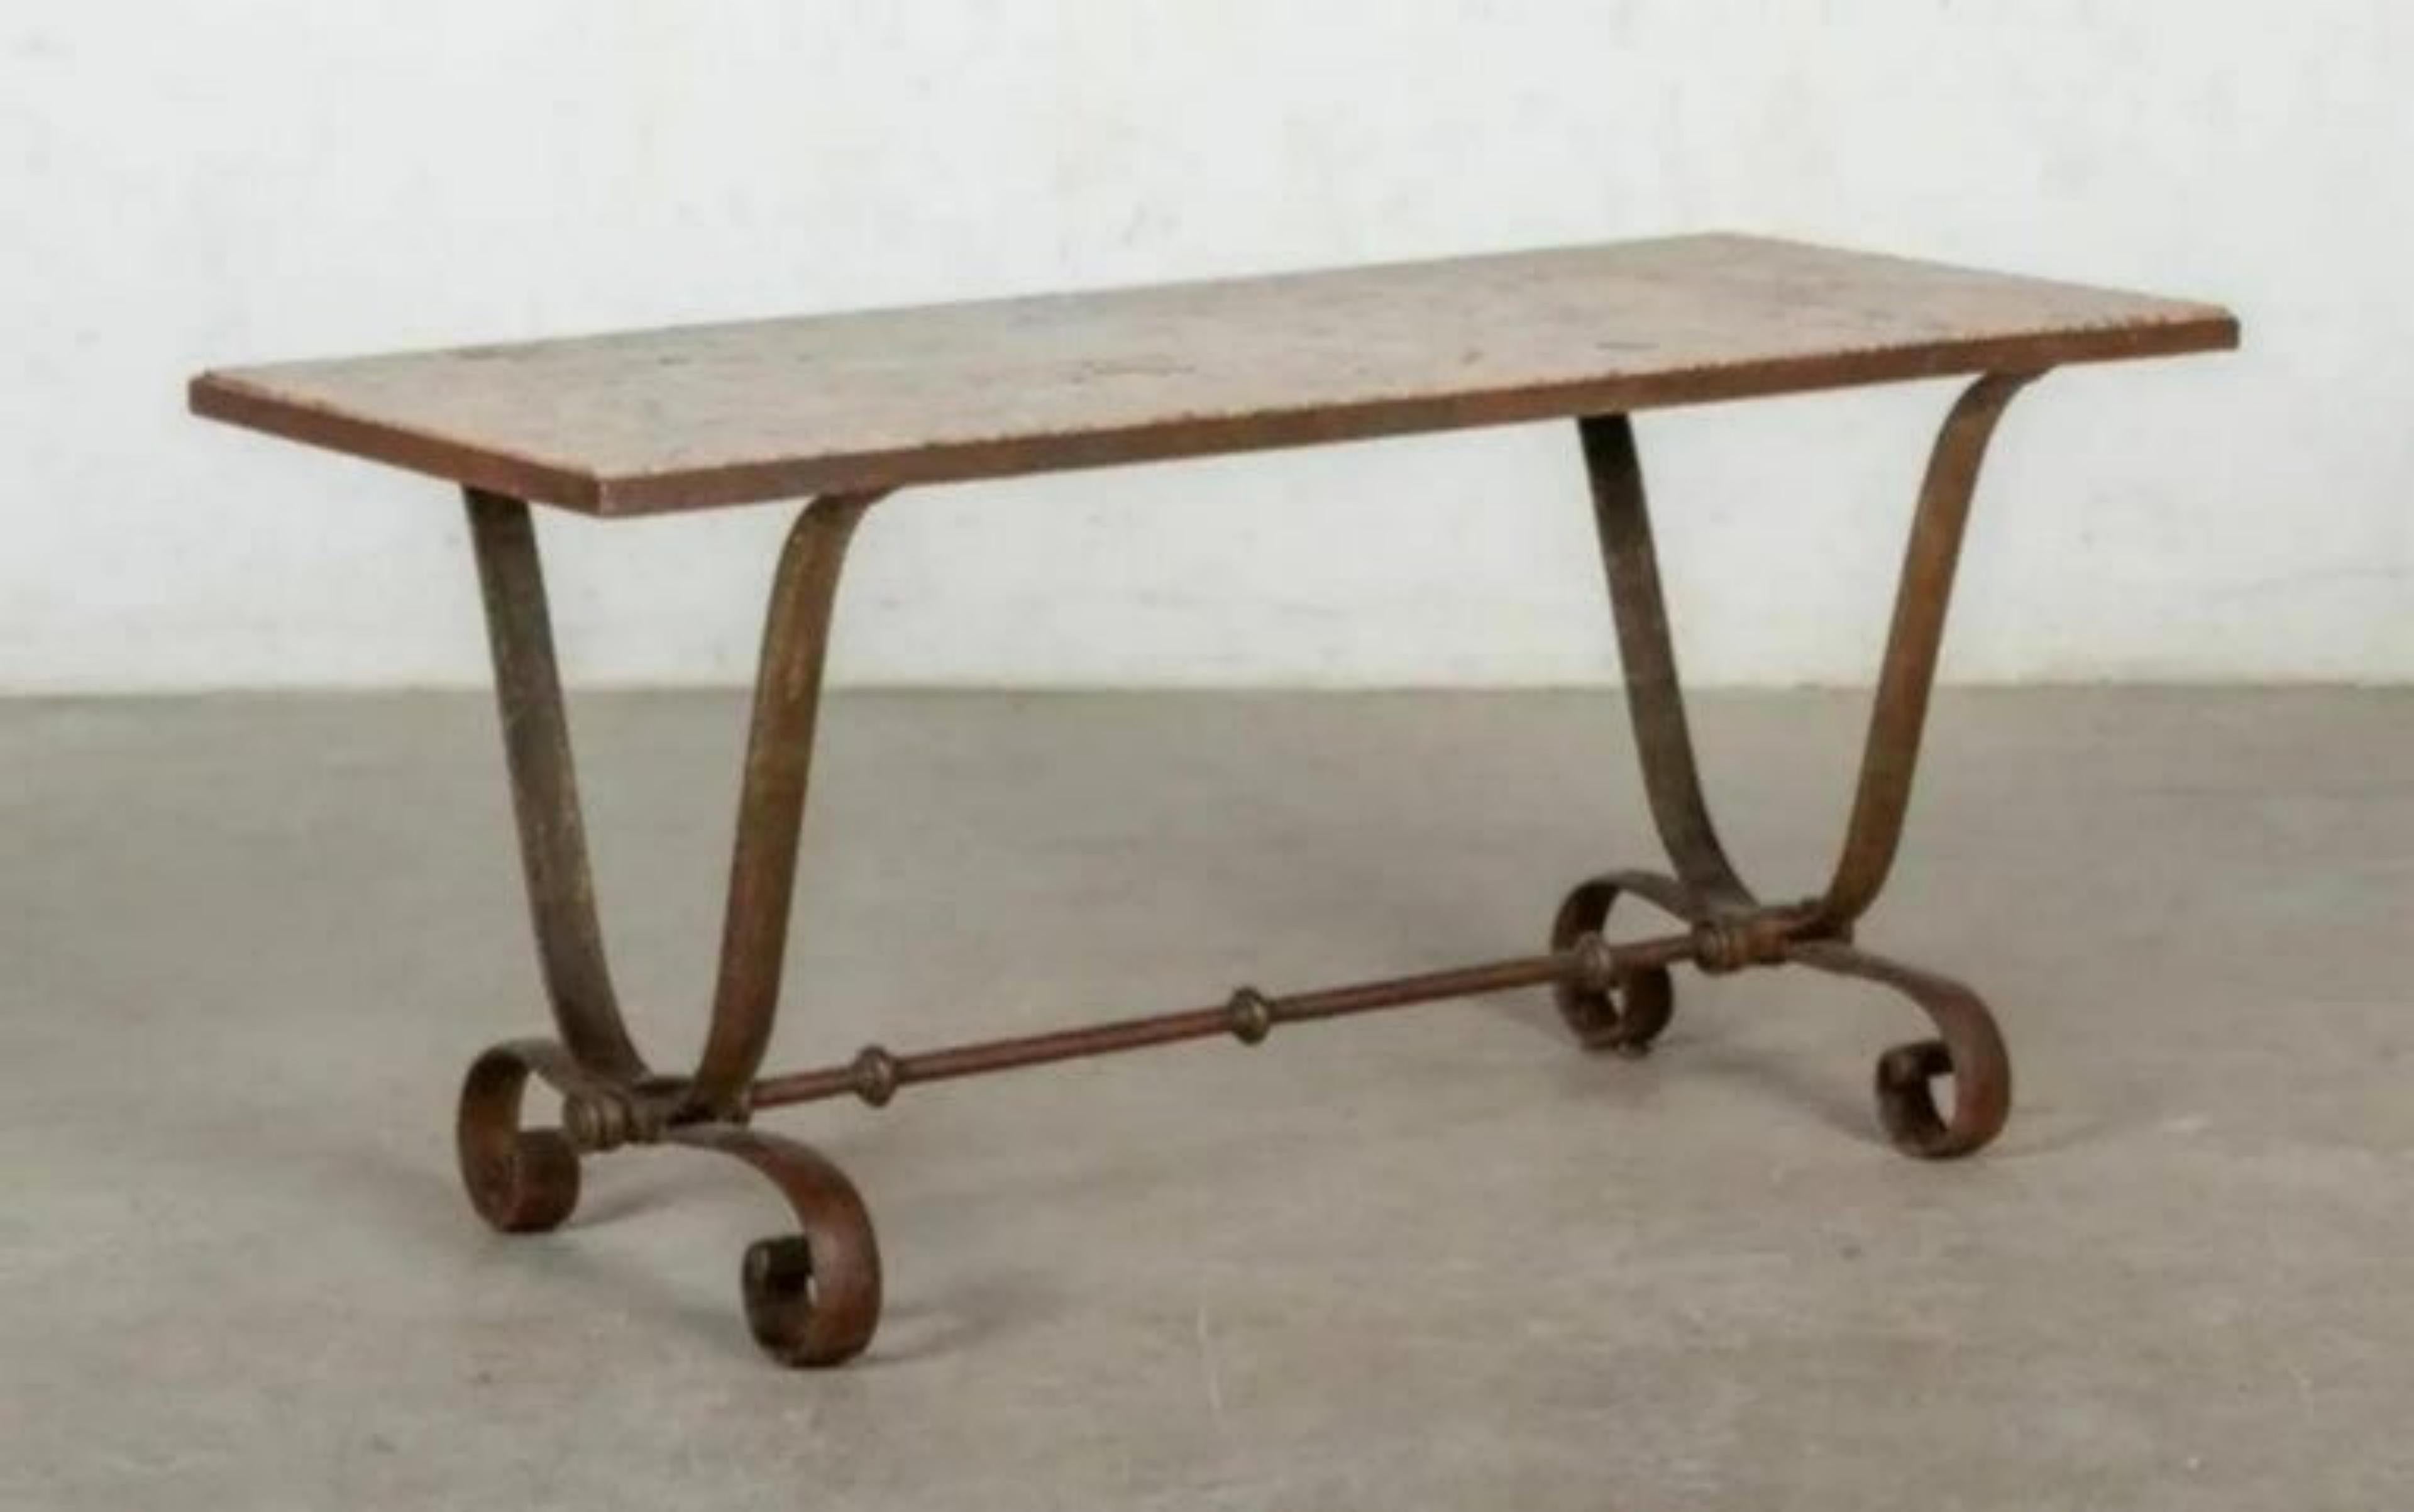 Title: Italian iron and marble table
Date/Period: XX century
Dimension: 51cm x 111cm x 51cm
Materials: iron and marble.
Additional information: Original Italian table from the 900´s 20th century. Italian private origin.

